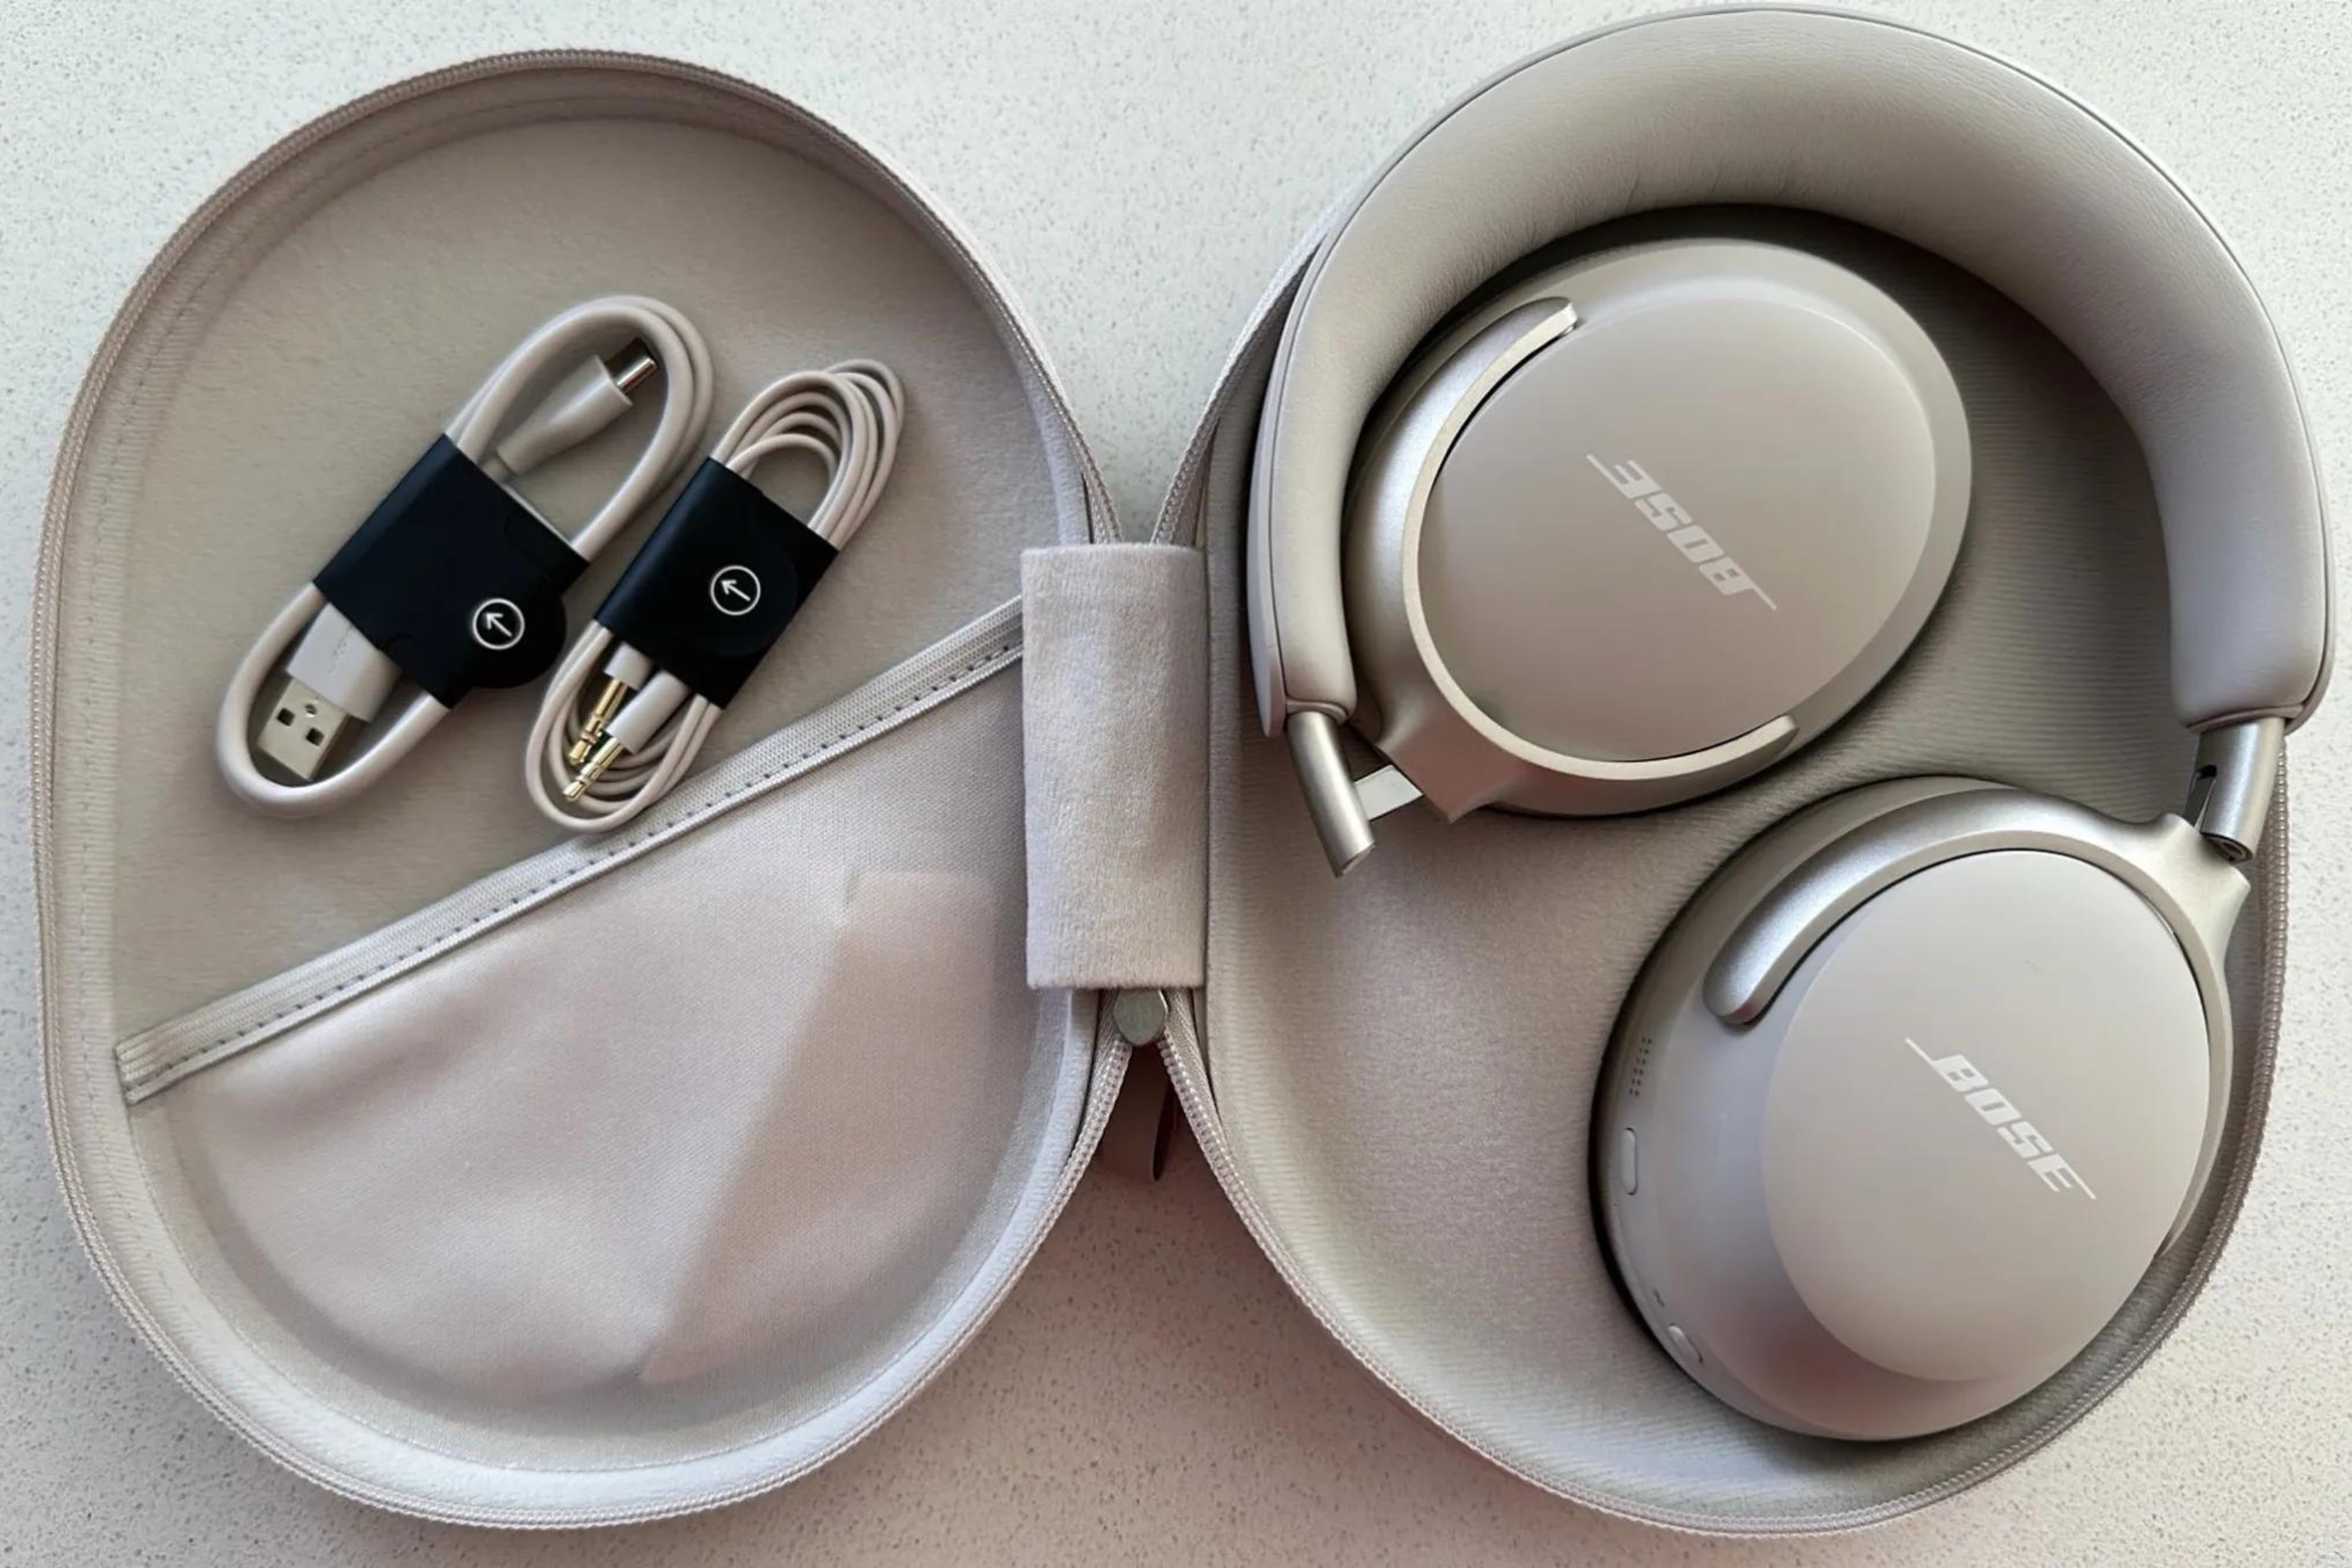 Here’s our first real look at the Bose QuietComfort Ultra headphones